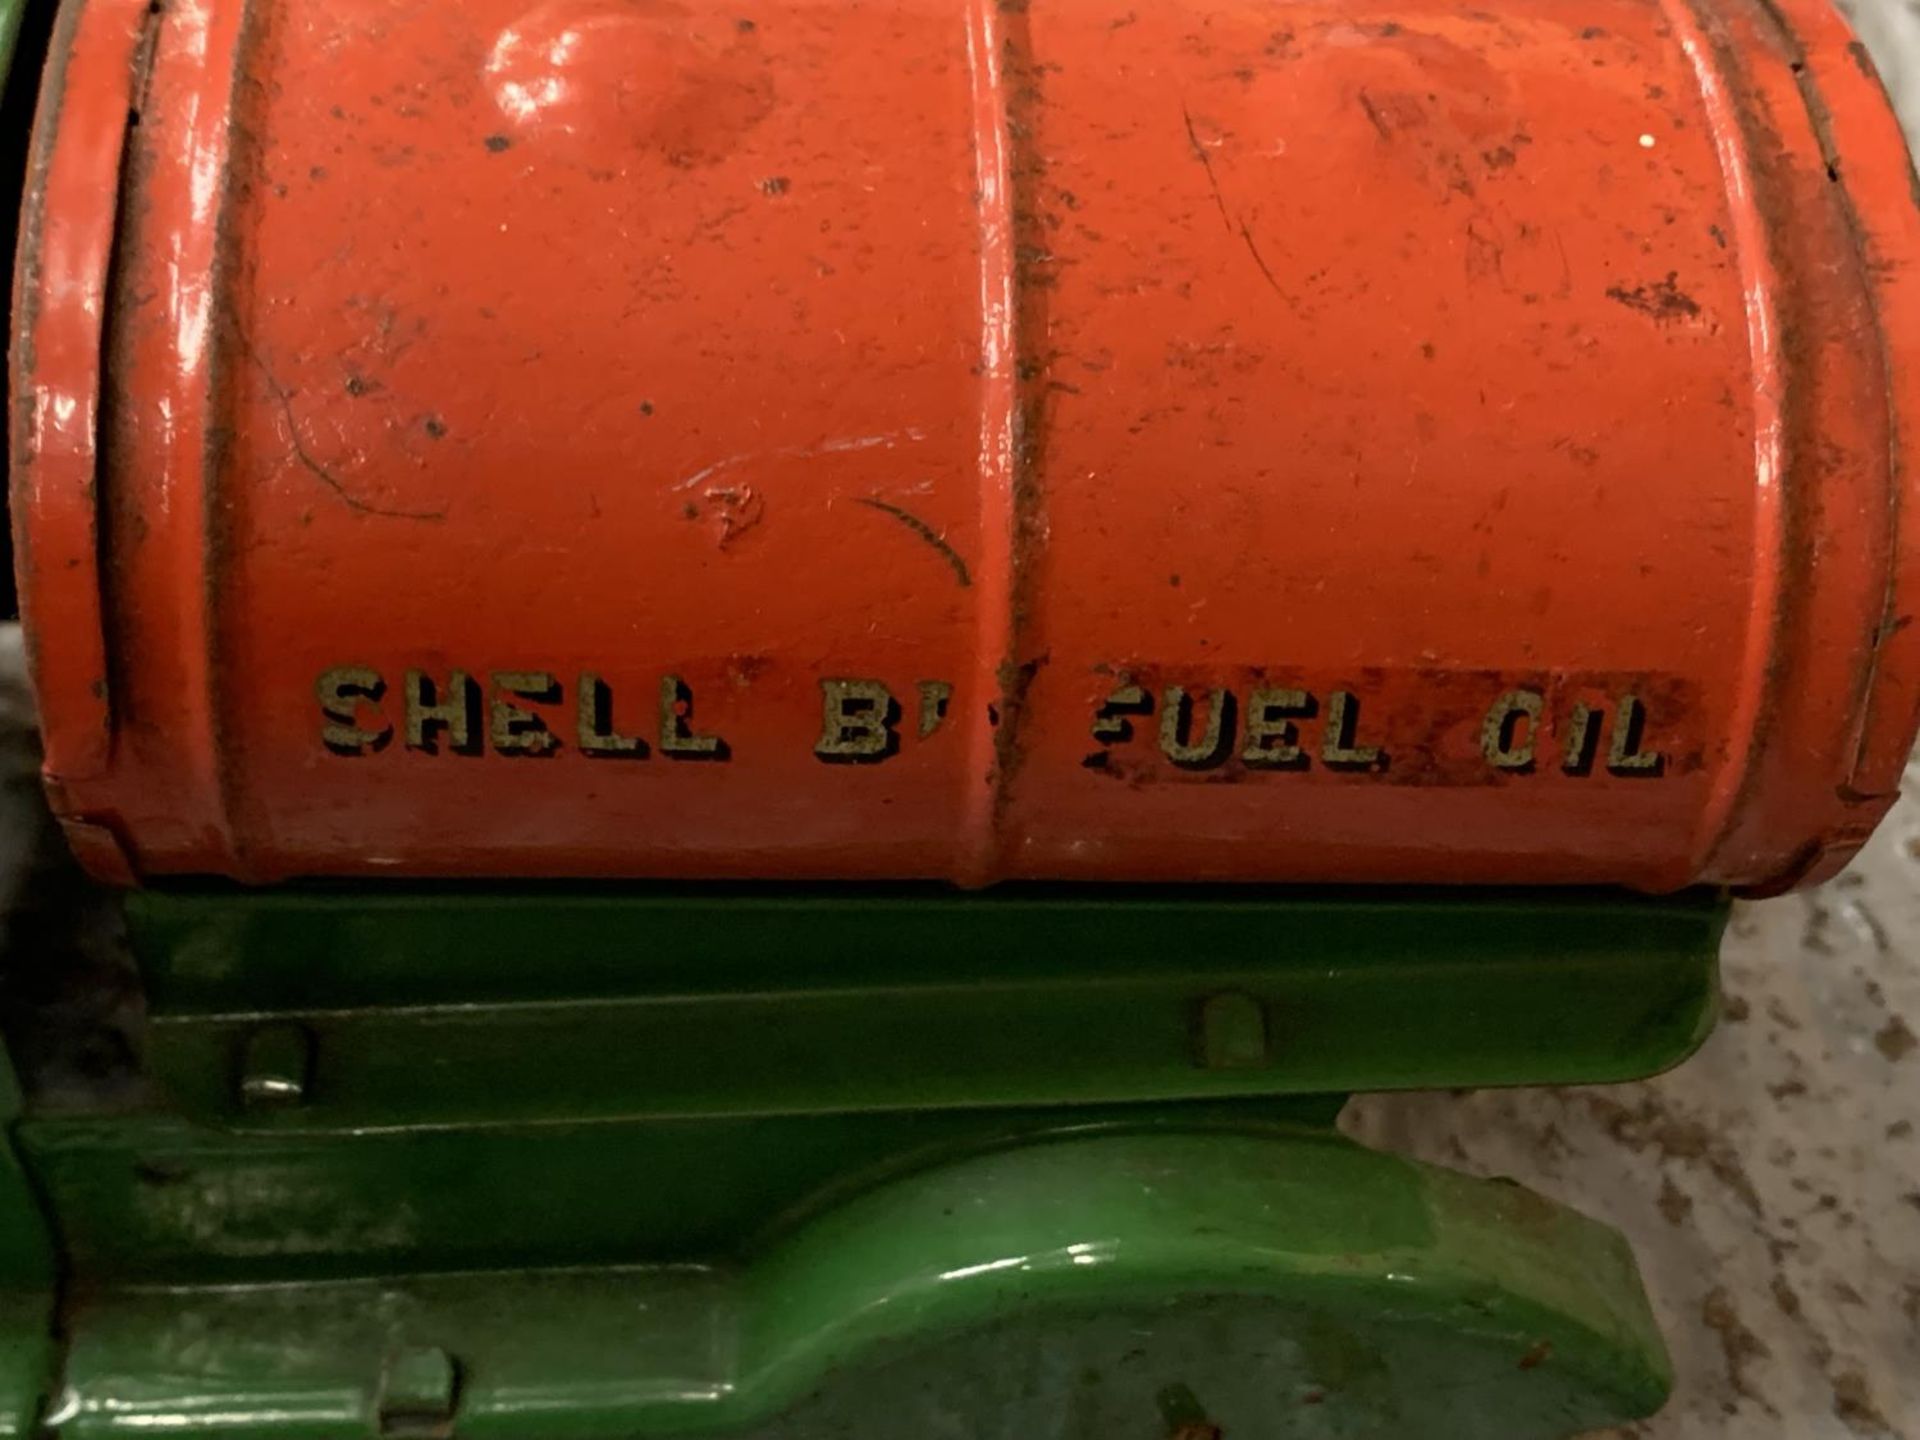 A VINTAGE SHELL BP OIL TANK - Image 3 of 5